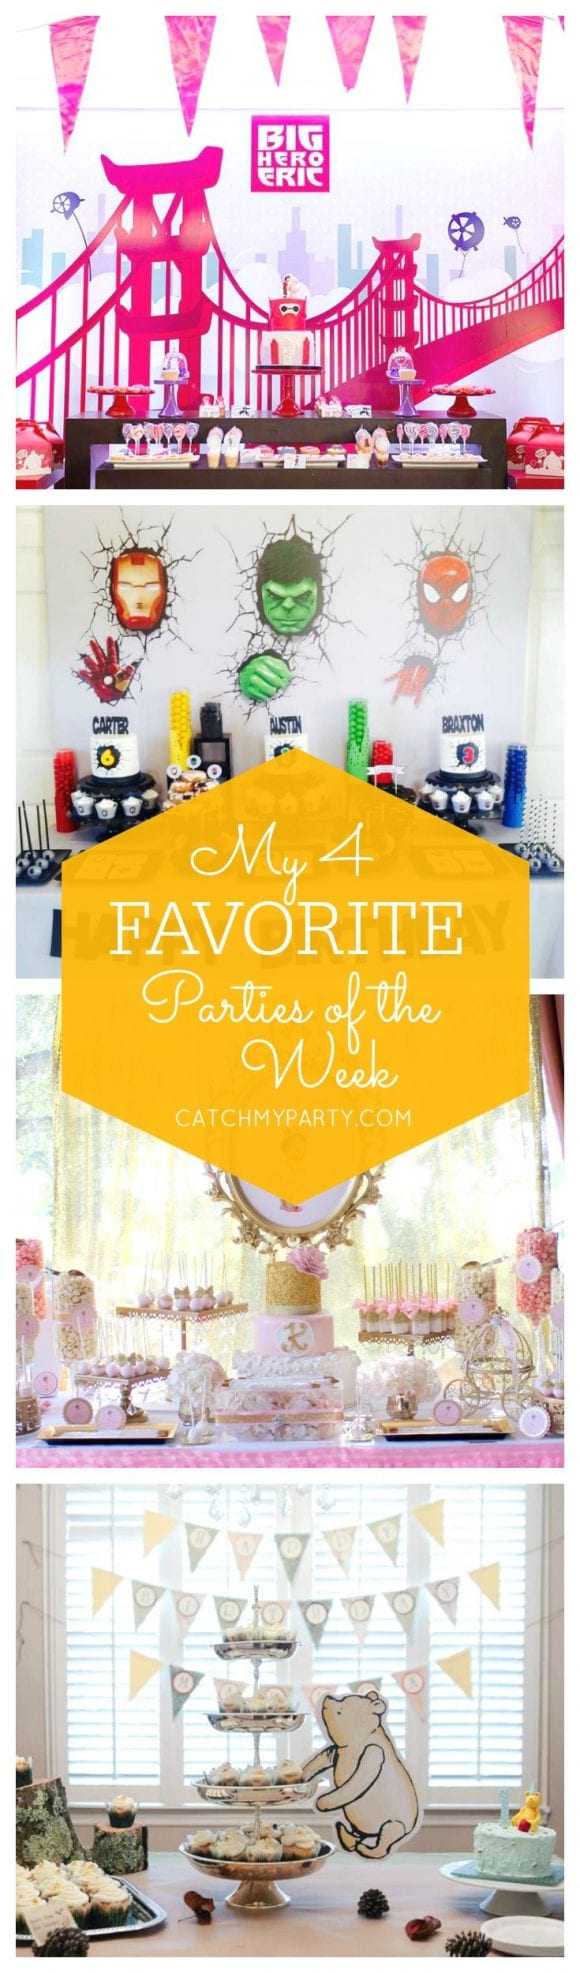 My favorite parties this week include a Big Hero 6 birthday party, a superhero birthday party, a princess baby shower and a Pooh bear 1st birthday party! | Catchmyparty.com